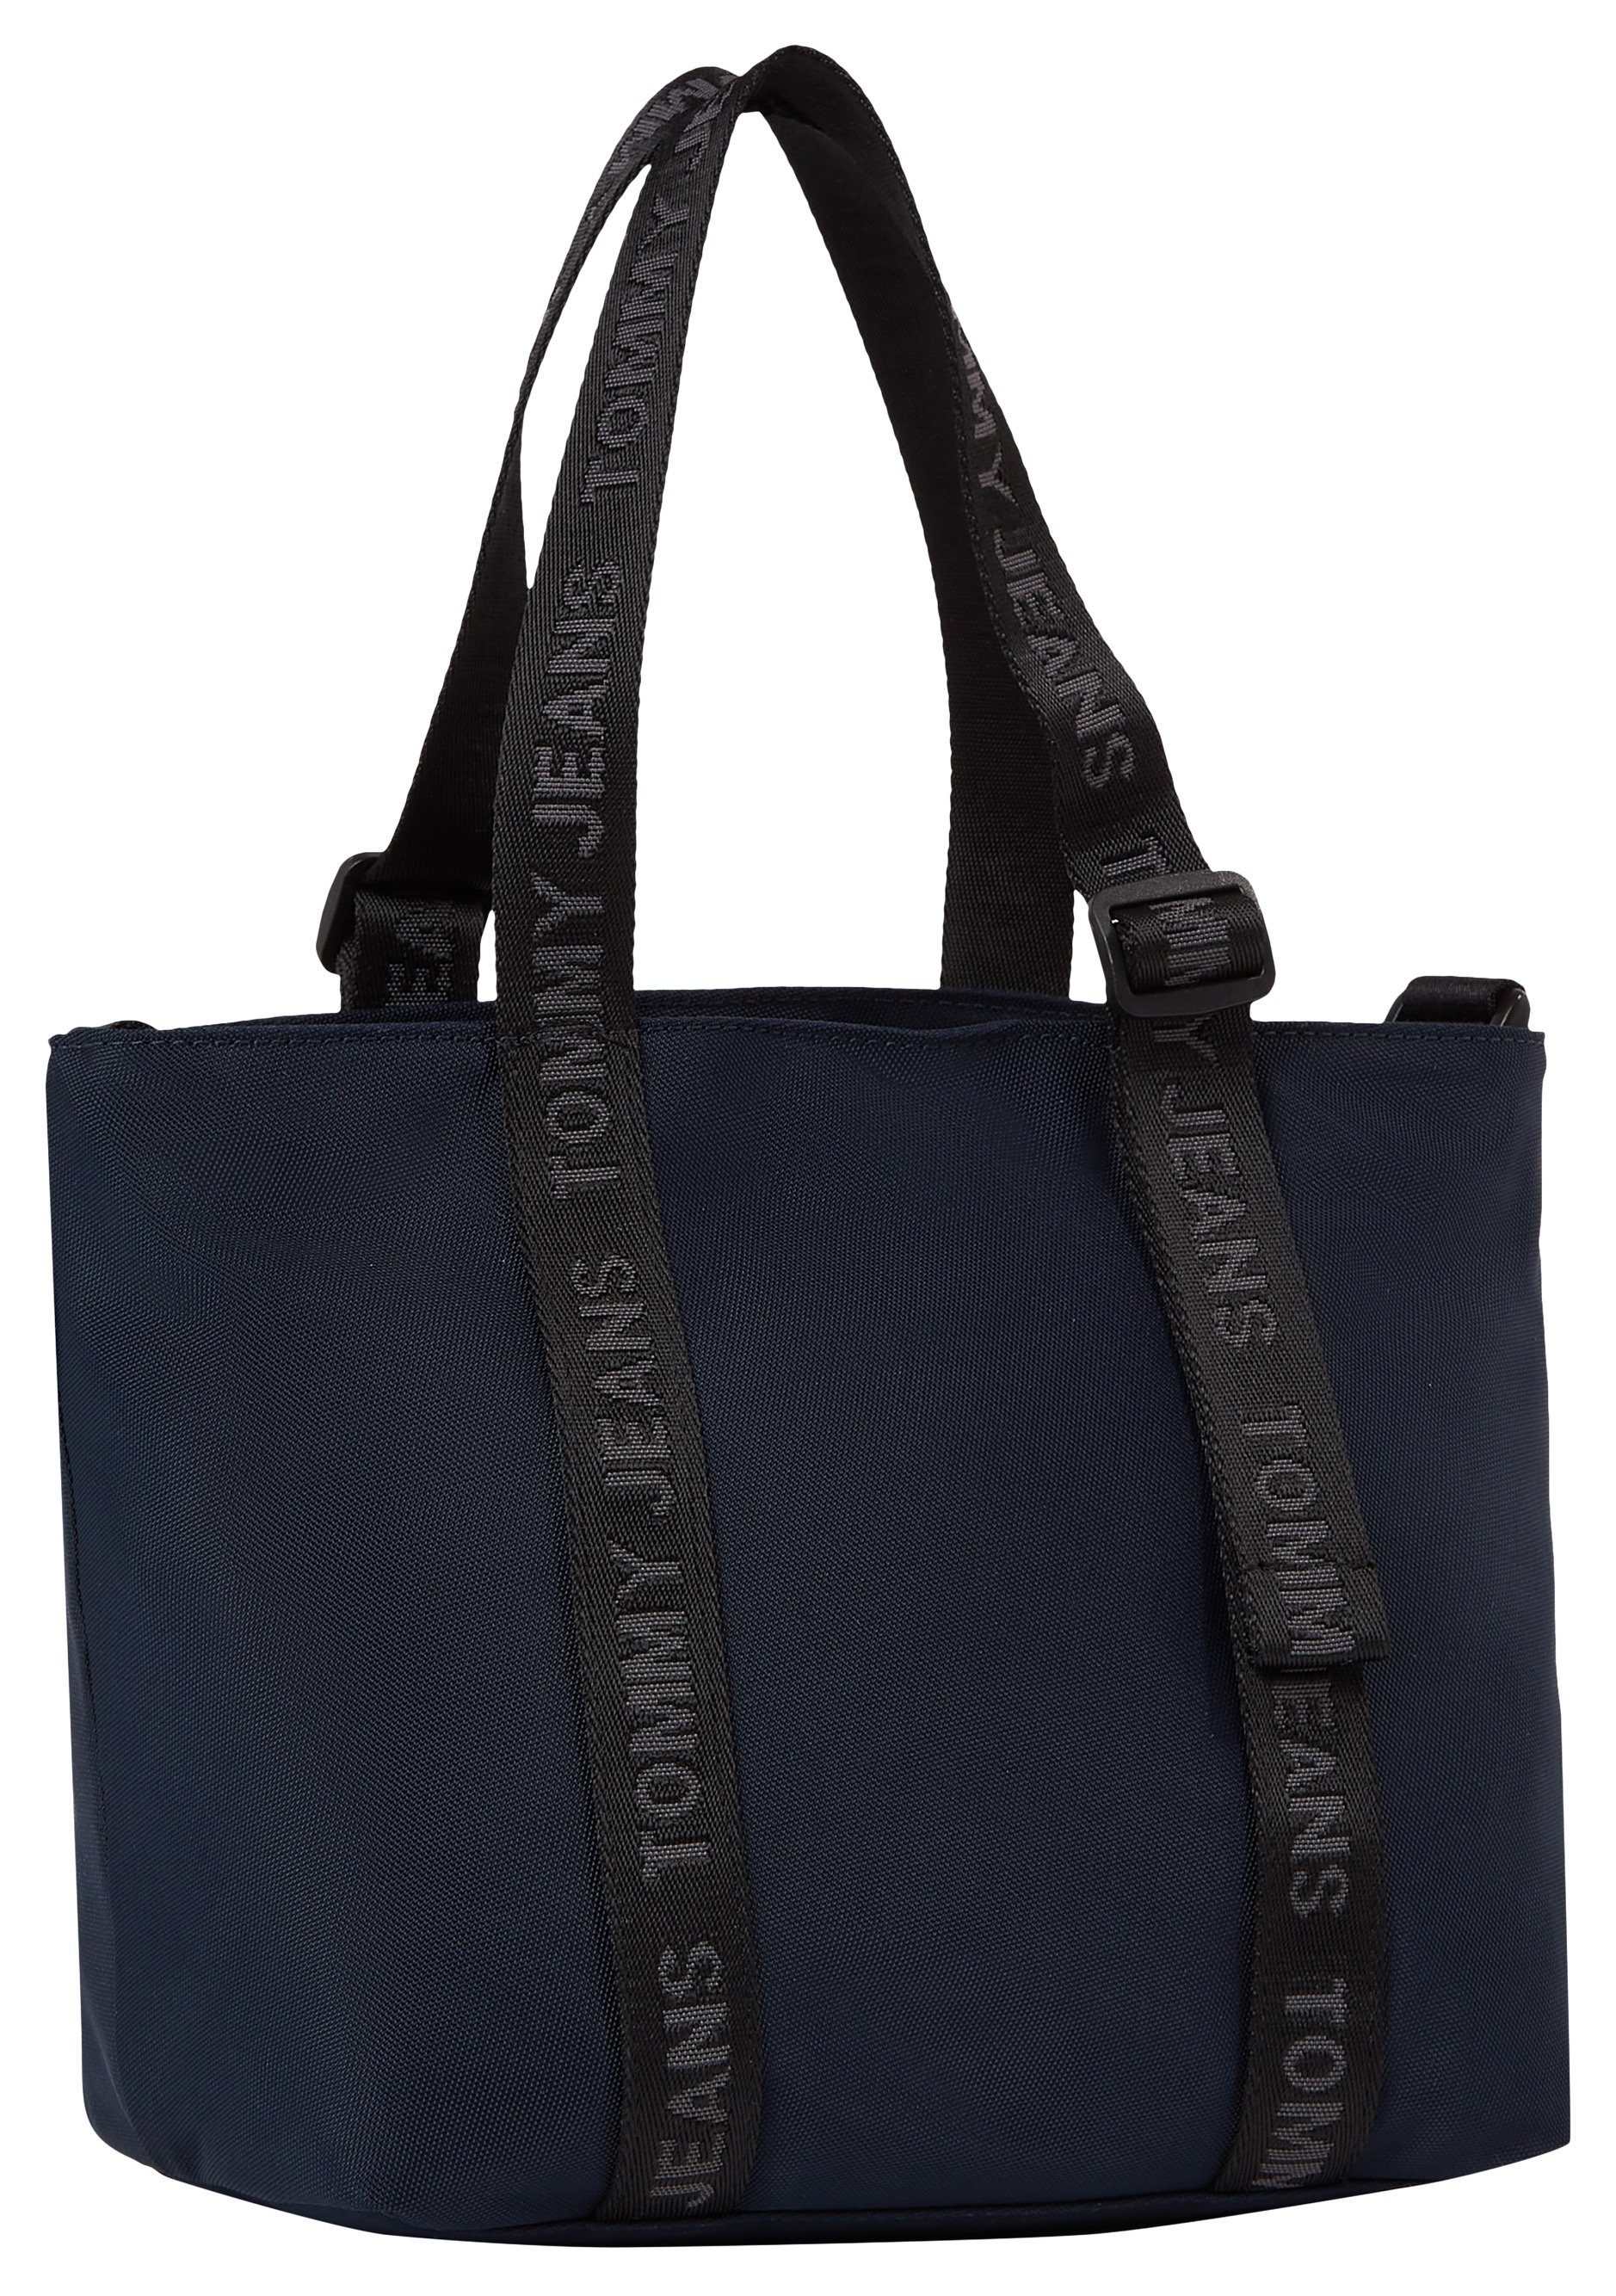 TOMMY JEANS Tas TJW ESSENTIAL DAILY MINI TOTE